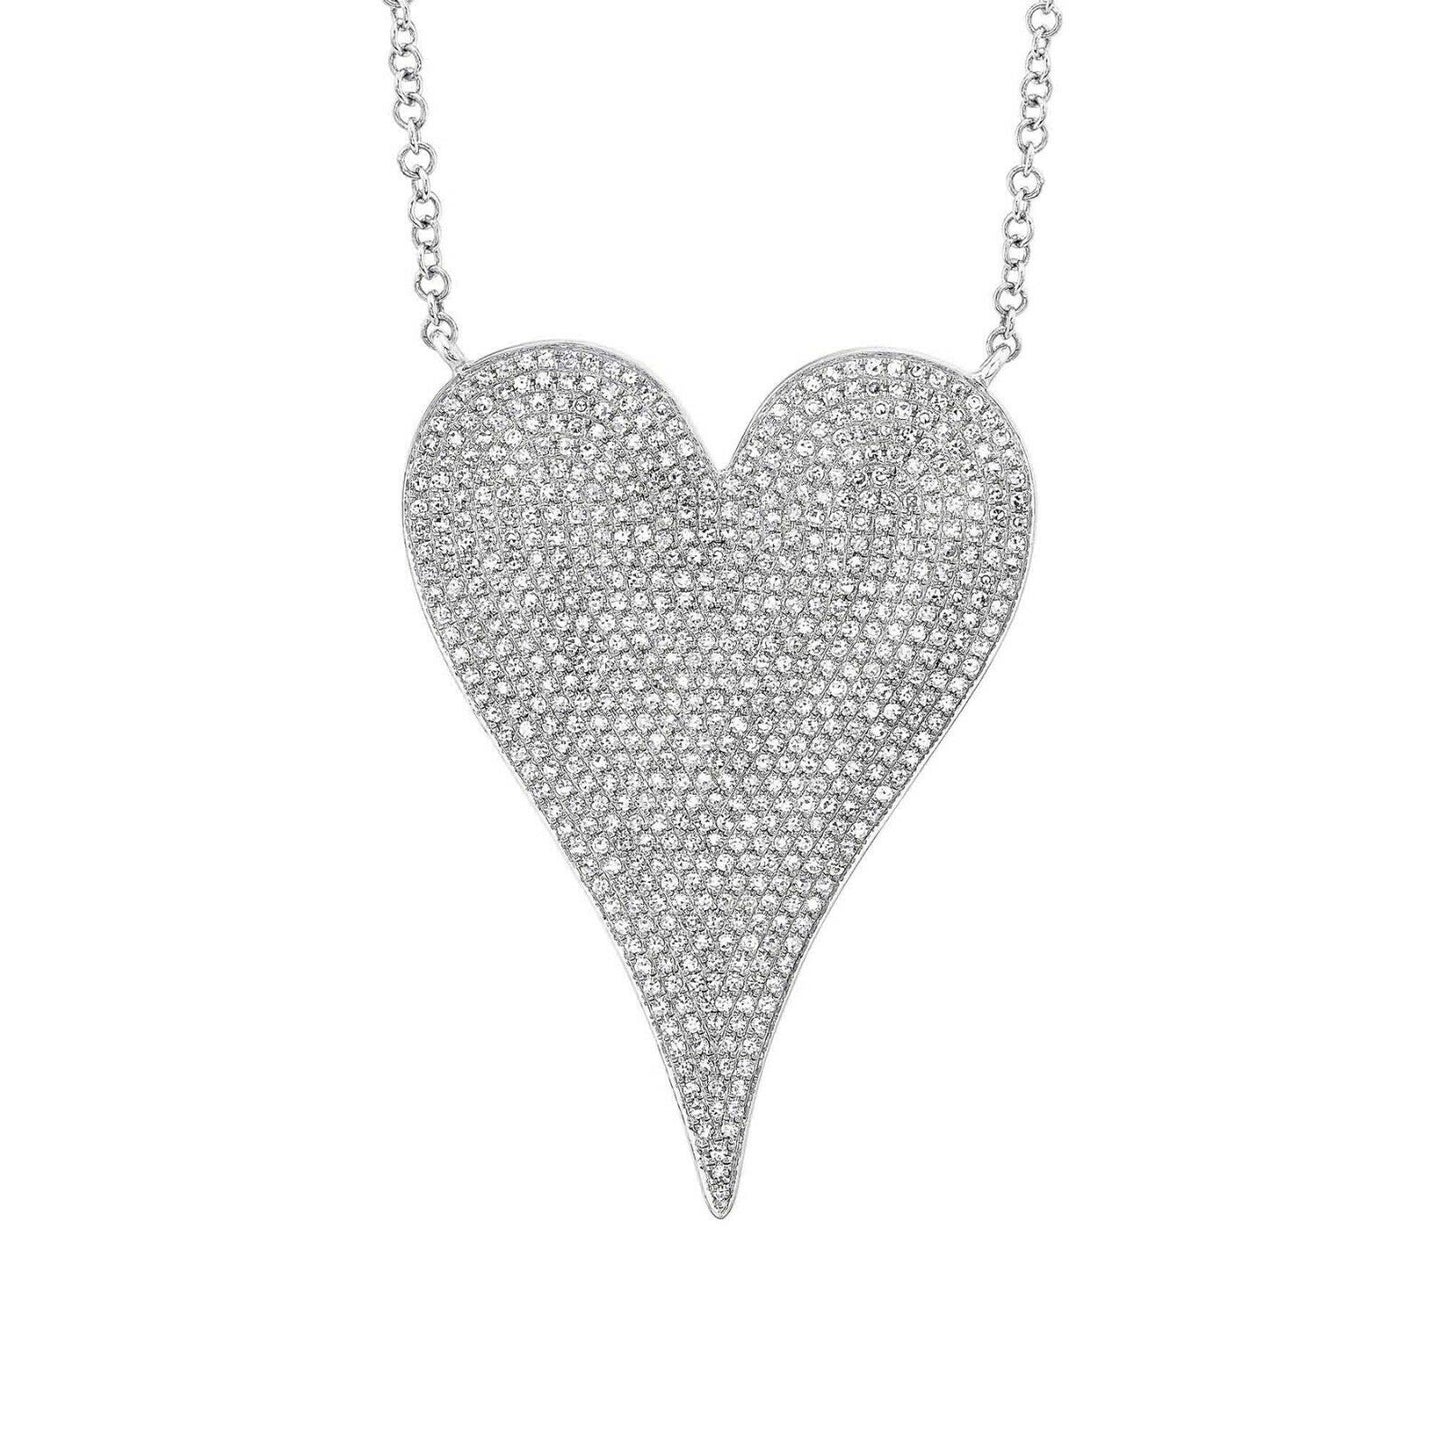 Big Diamond Heart Necklace 14K White Gold 1.42CT Round Cut Natural